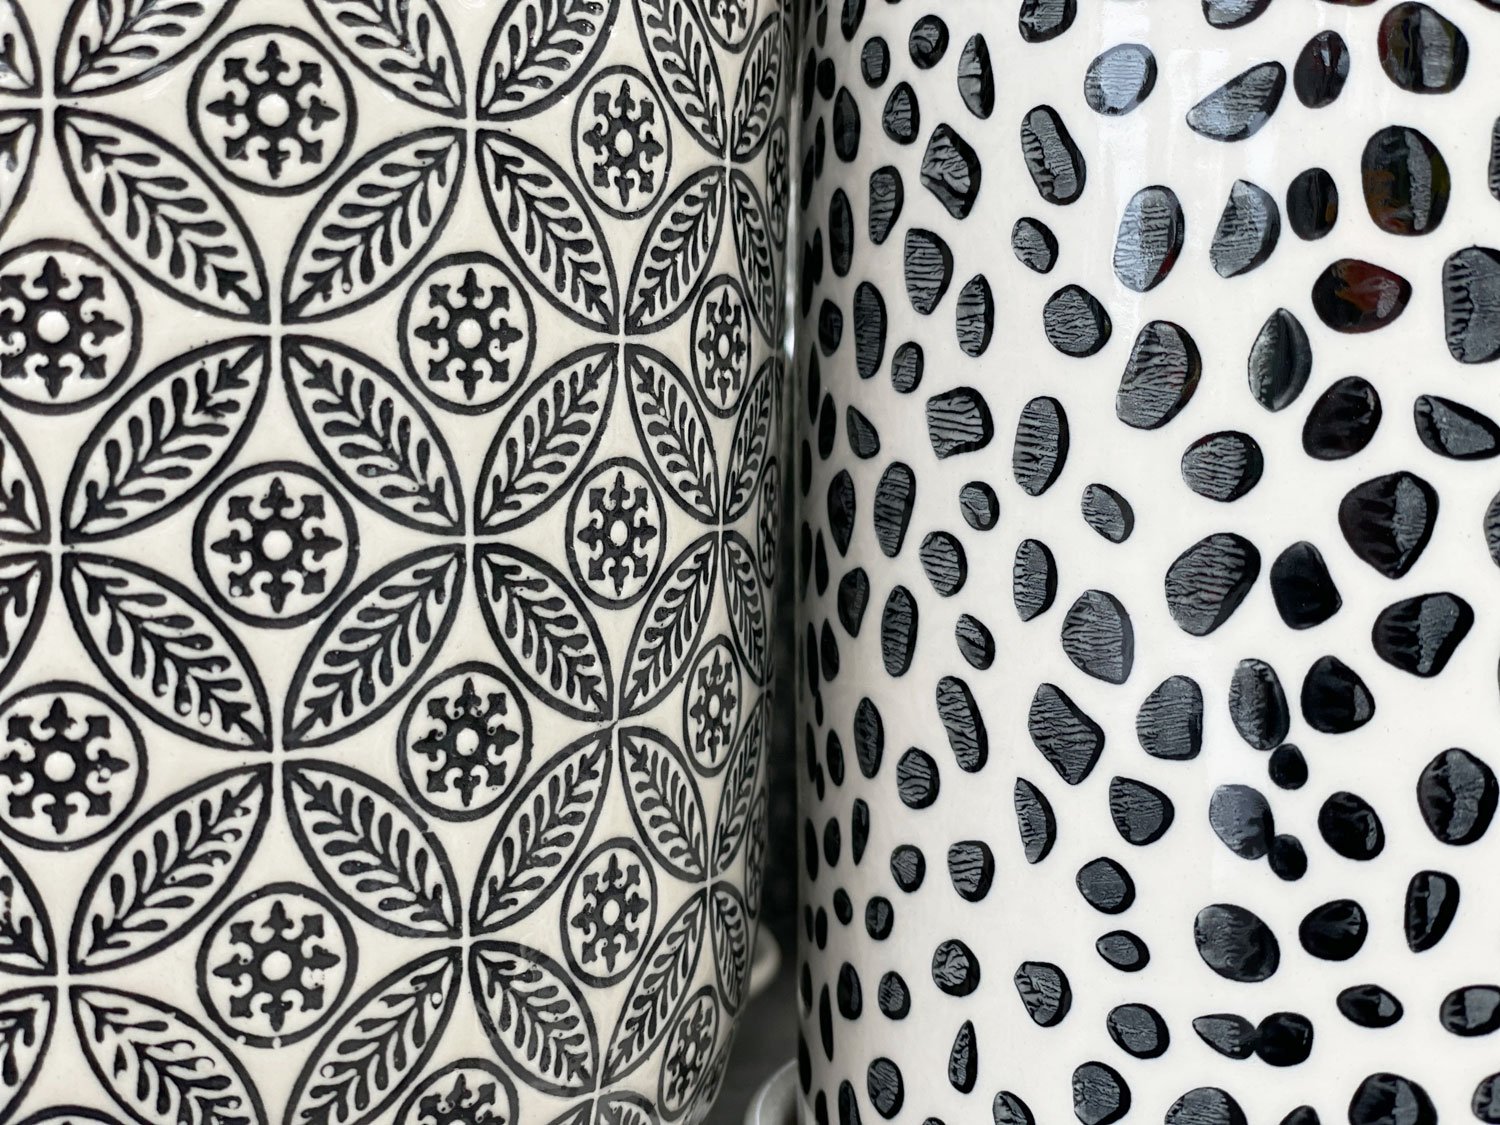 black-and-white-pottery-patterns.jpg